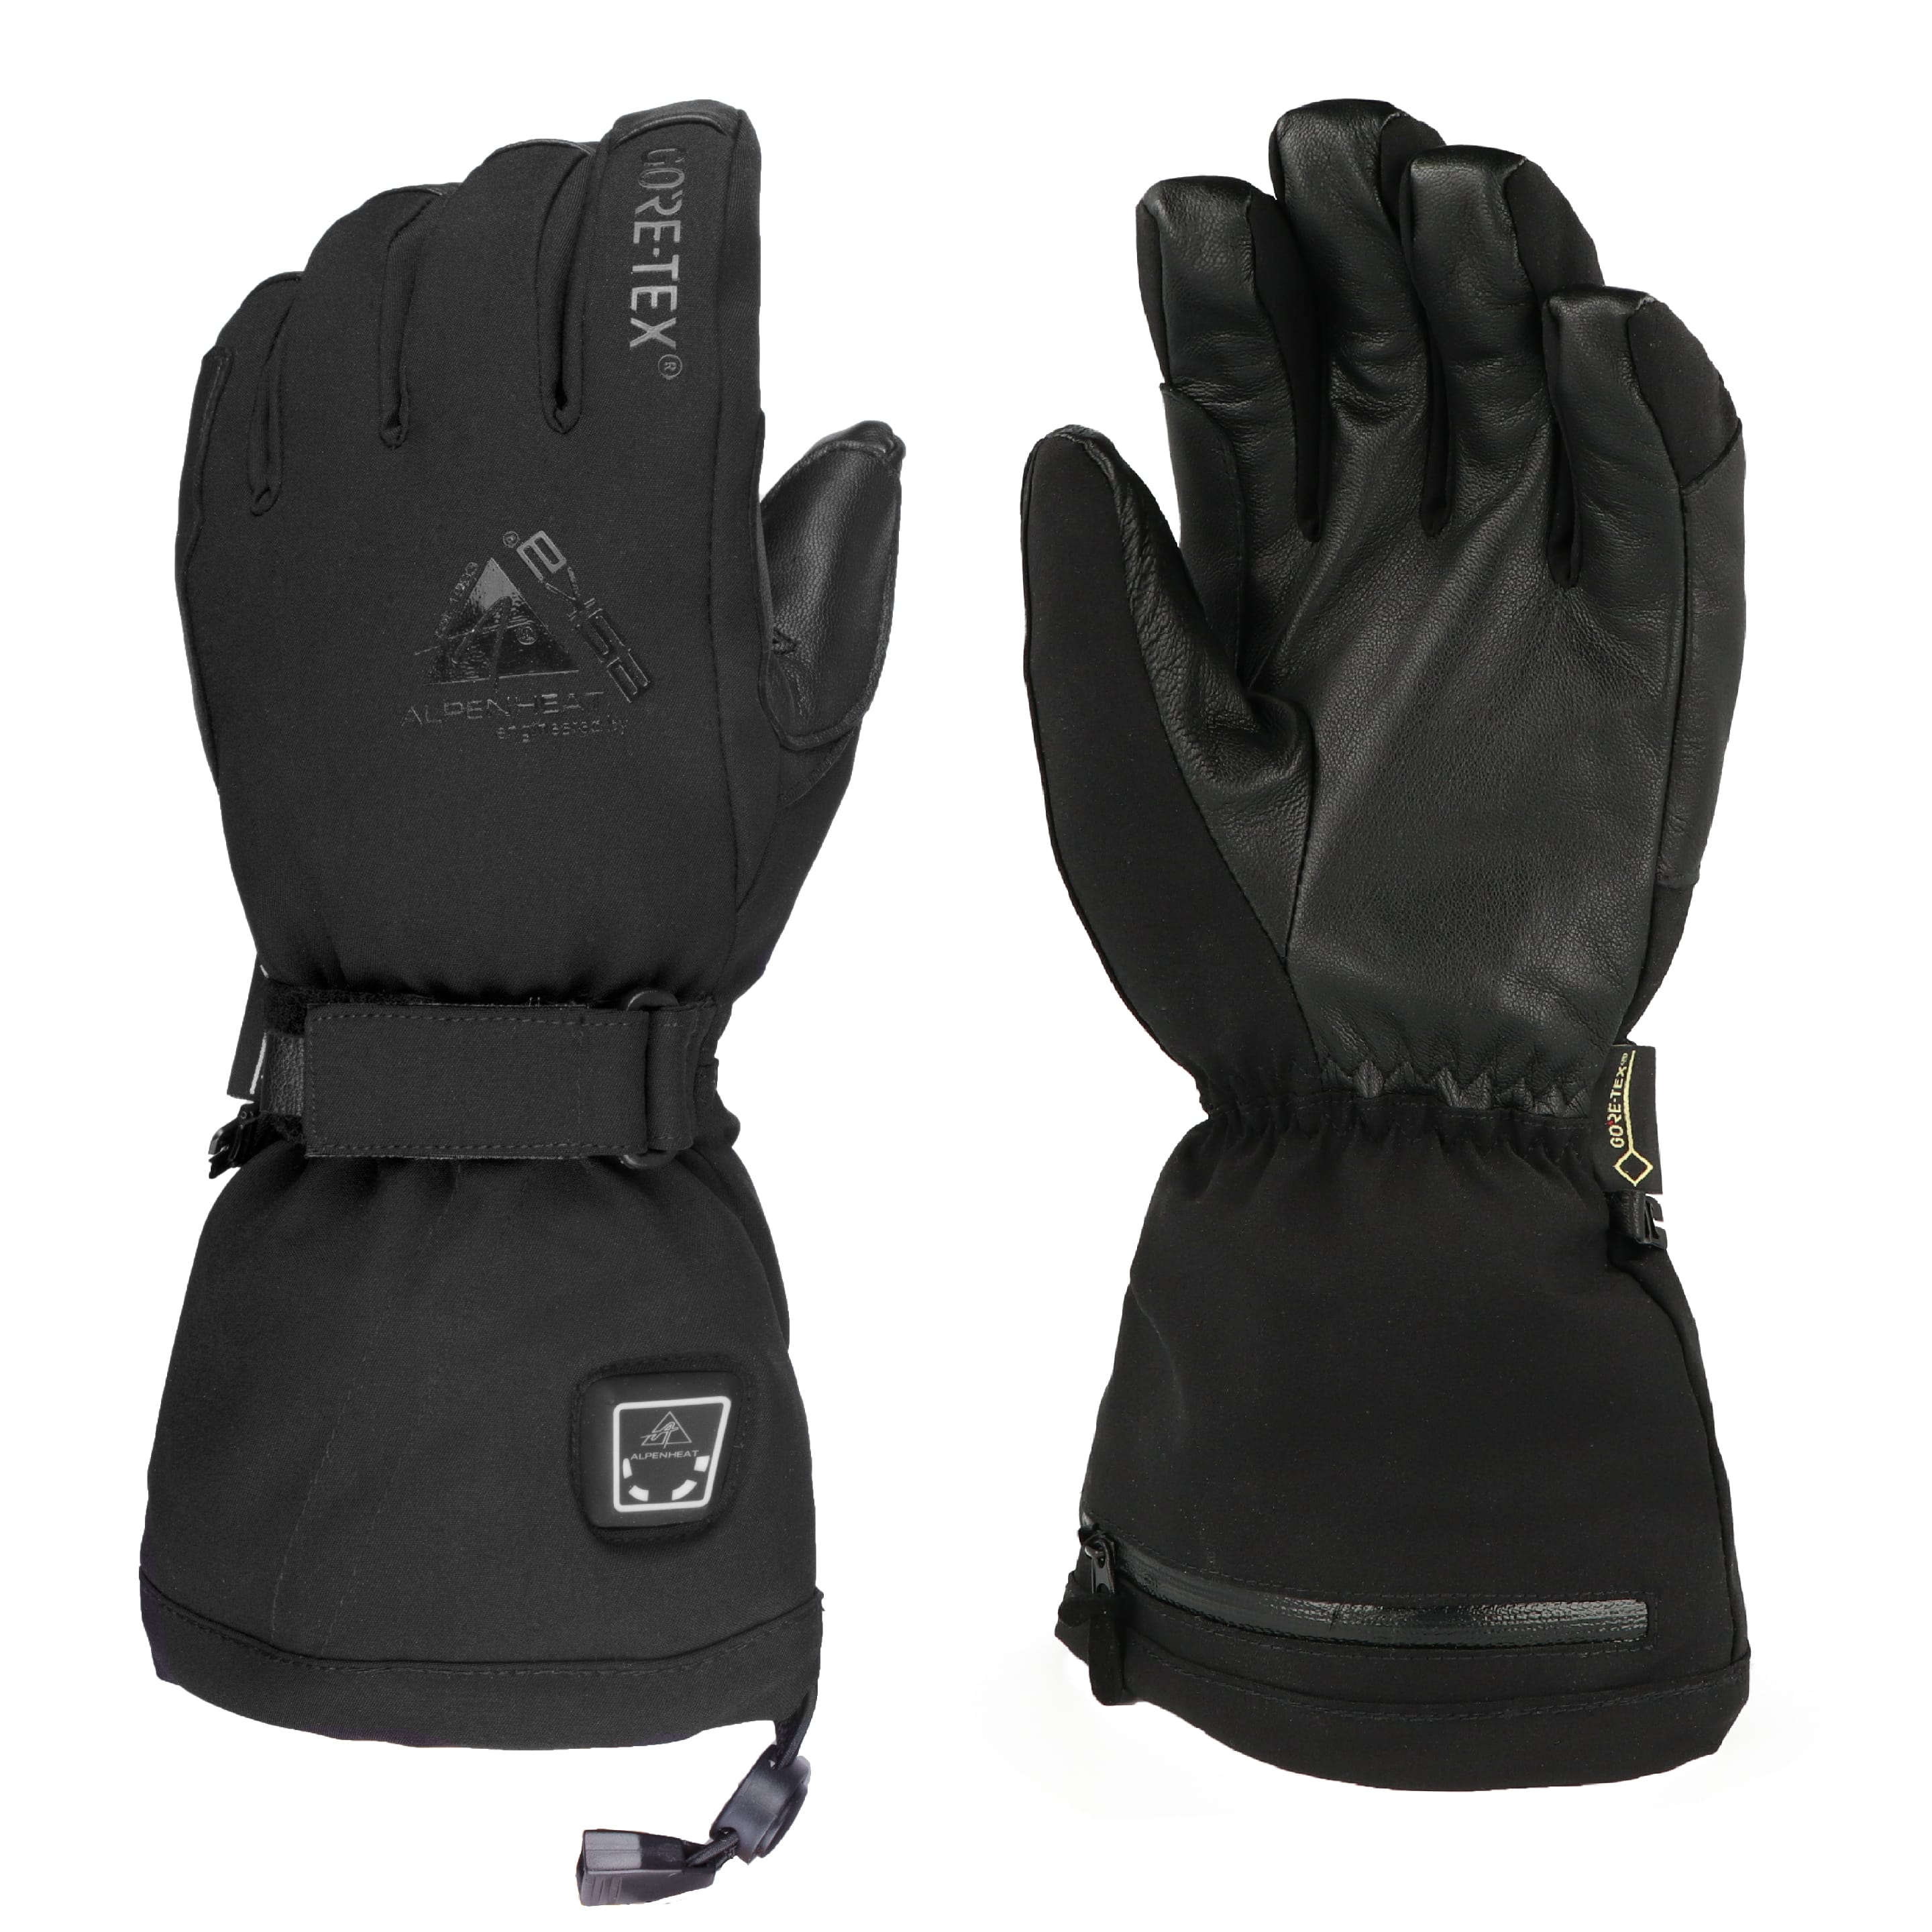 Heated Gloves for Men and Women